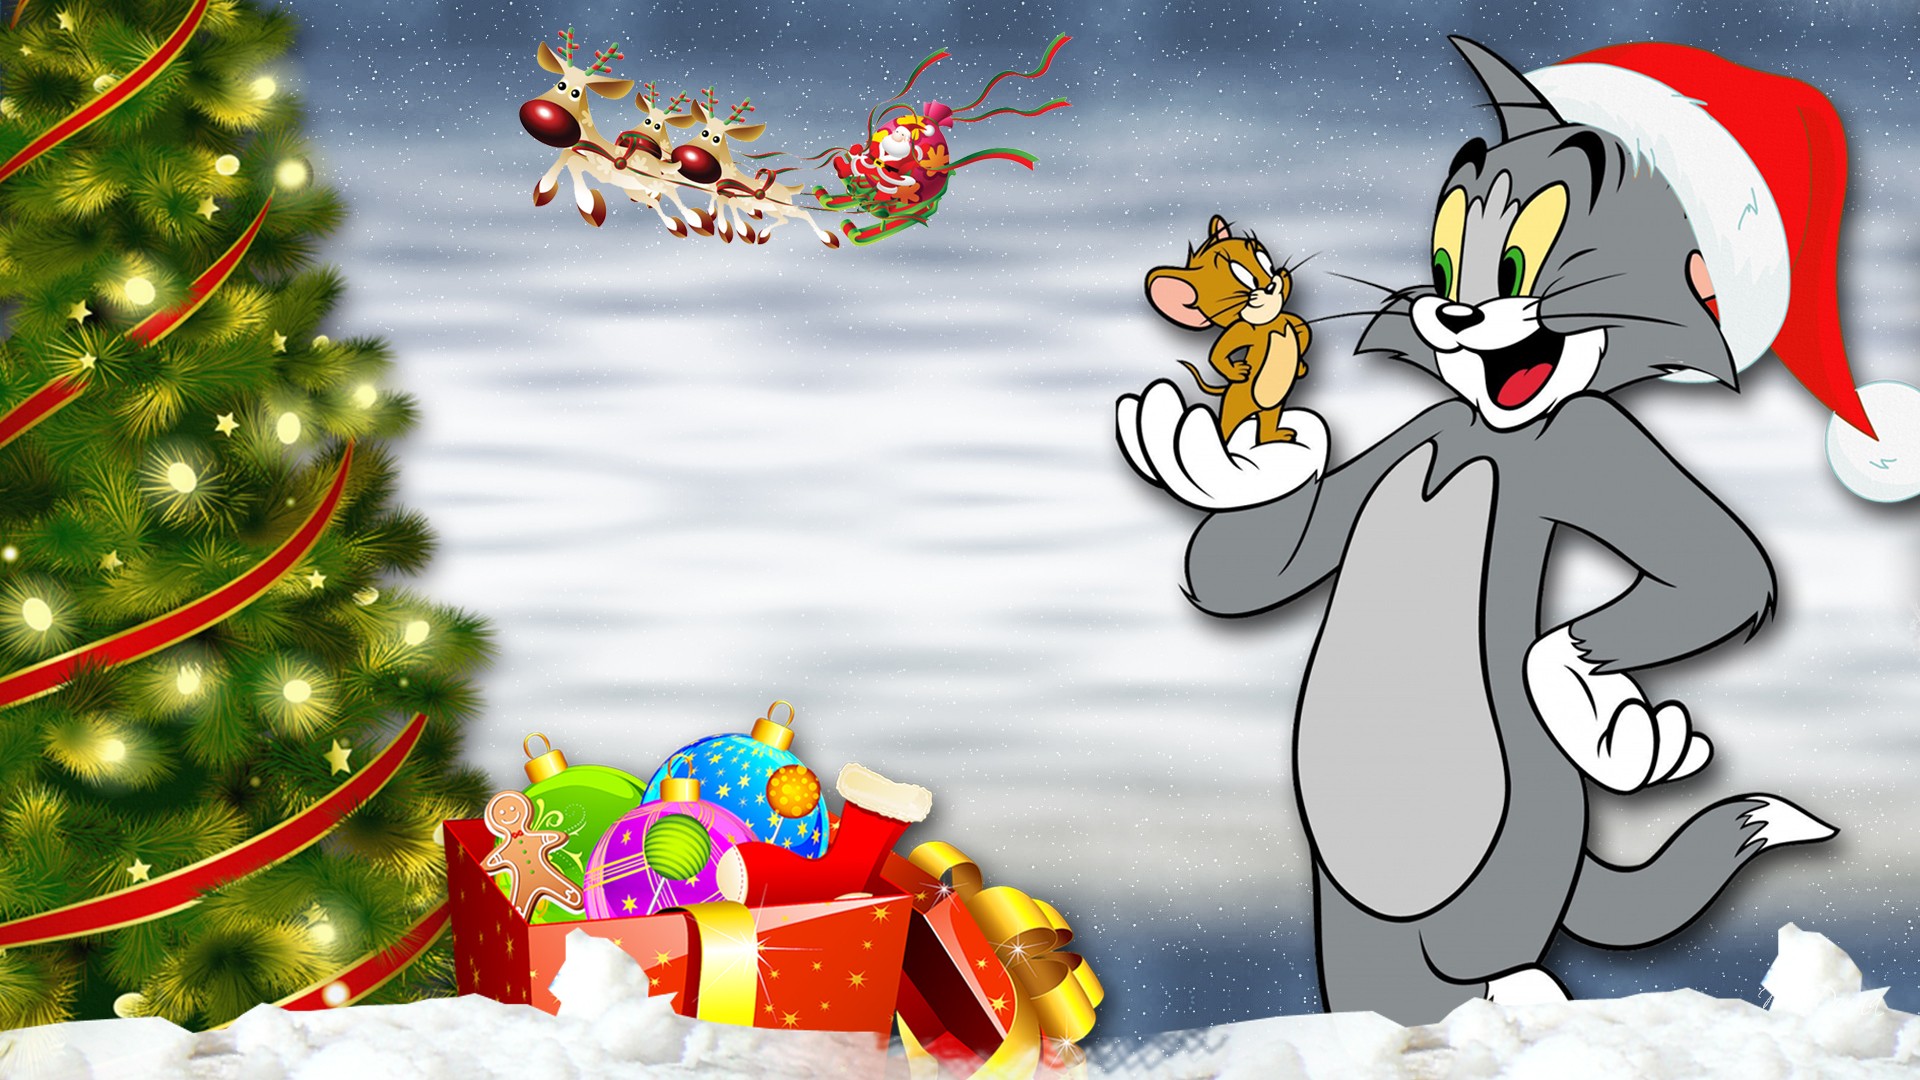 Tom And Jeryy Winter Tails Christmas Tree Santa Claus Gifts Desktop Hd